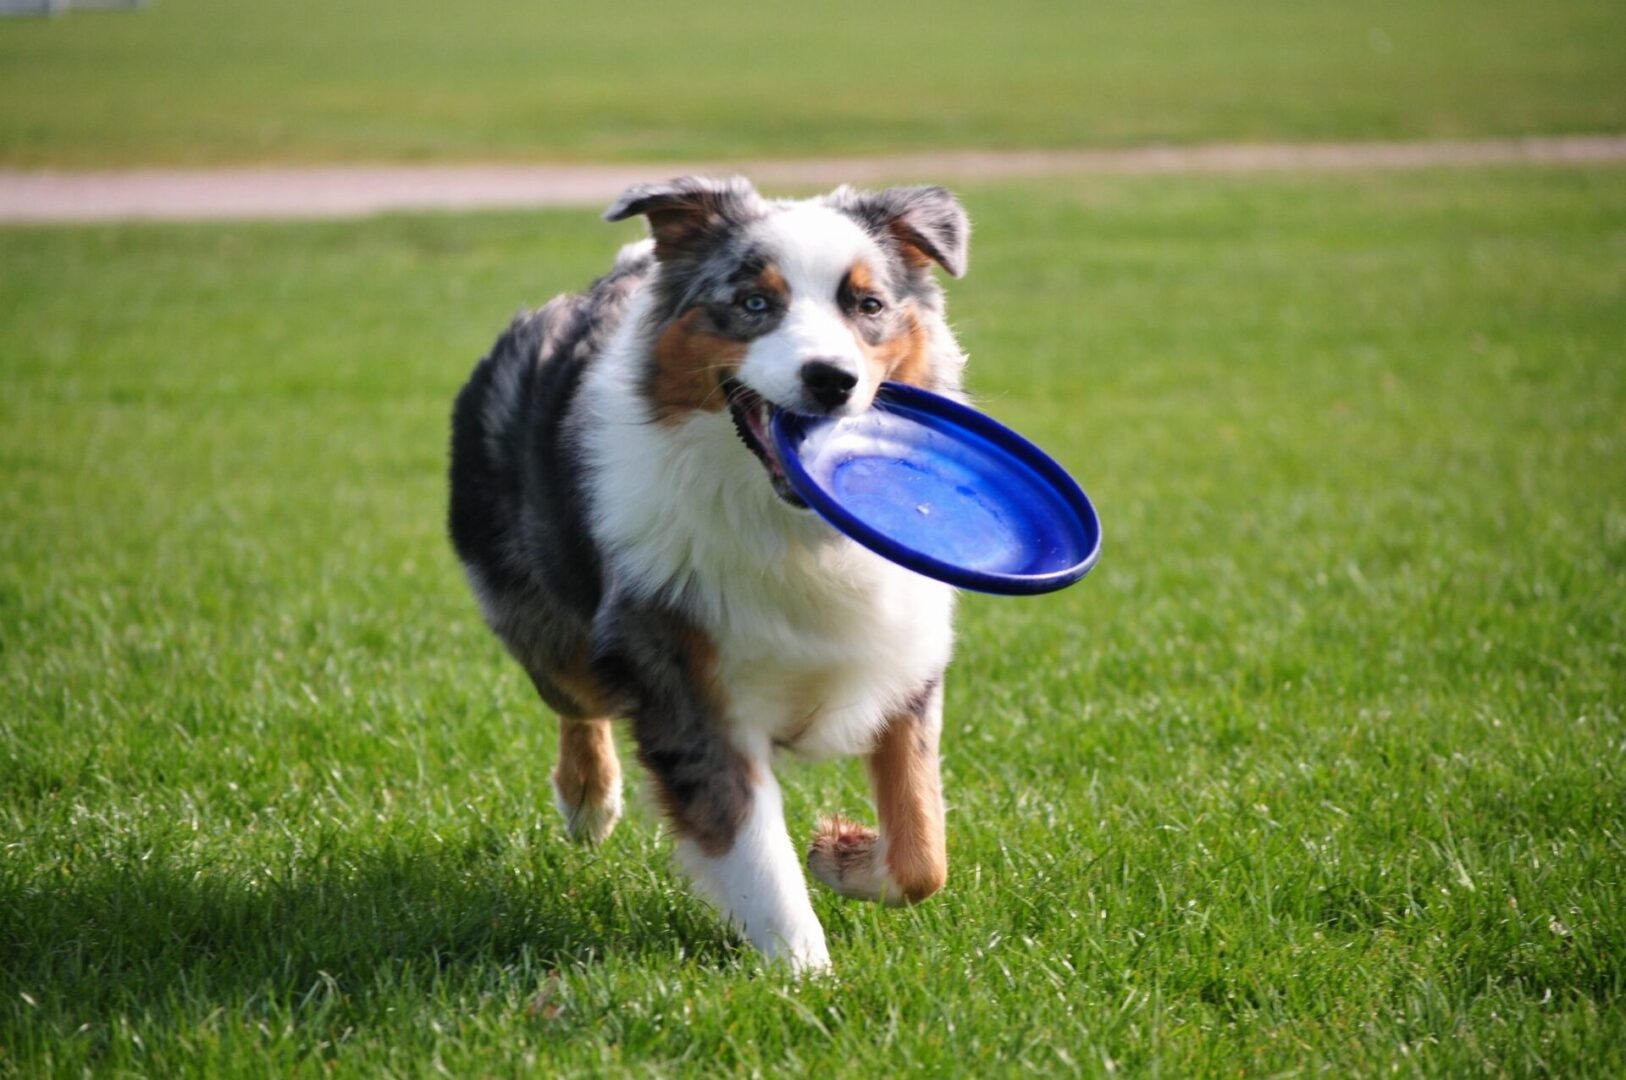 A dog carrying a frisbee in its mouth.